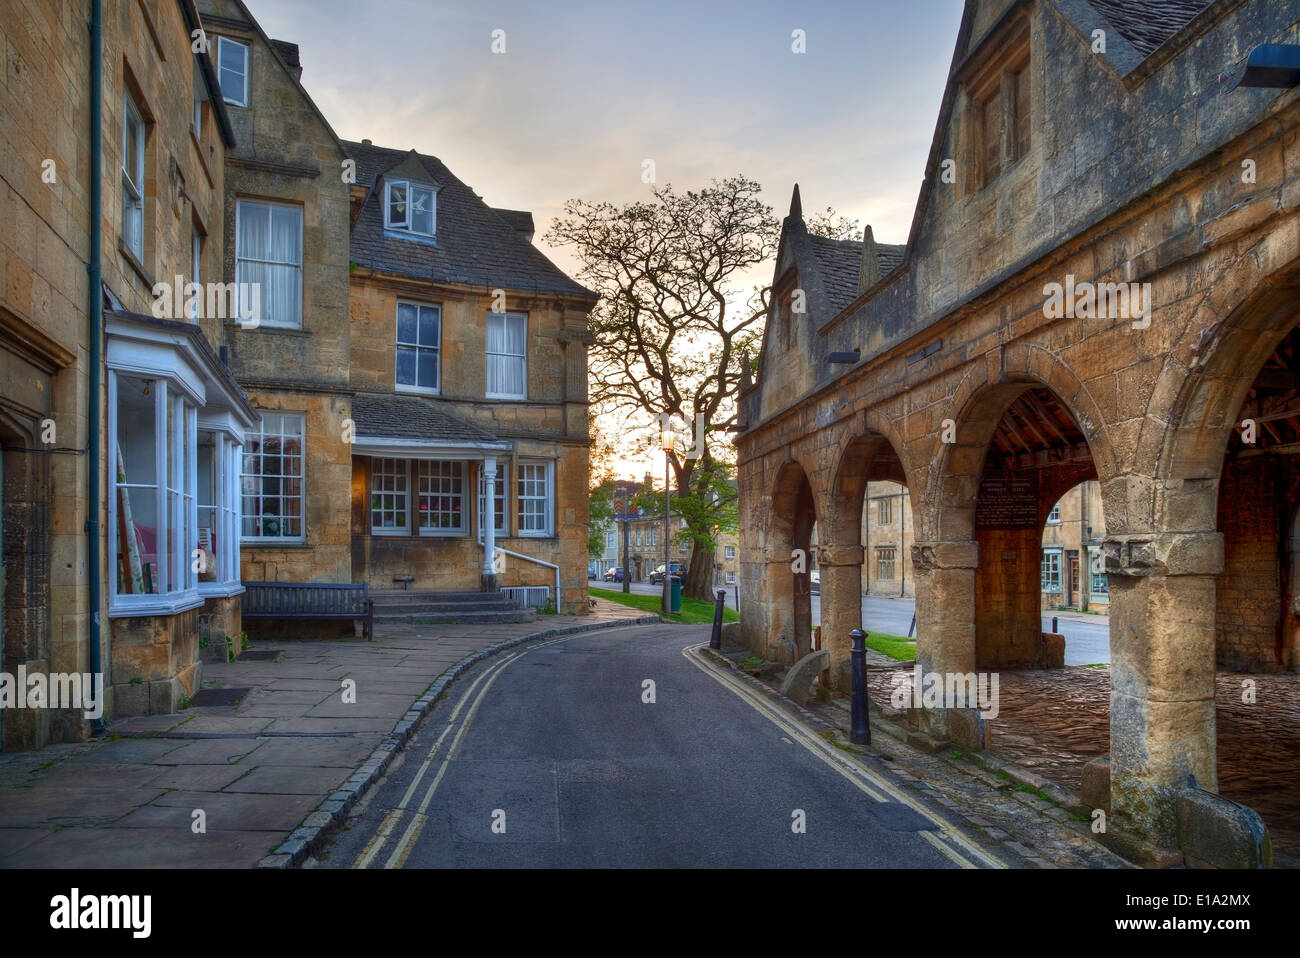 The Old Market Hall at Chipping Campden, Gloucestershire, England. Stock Photo